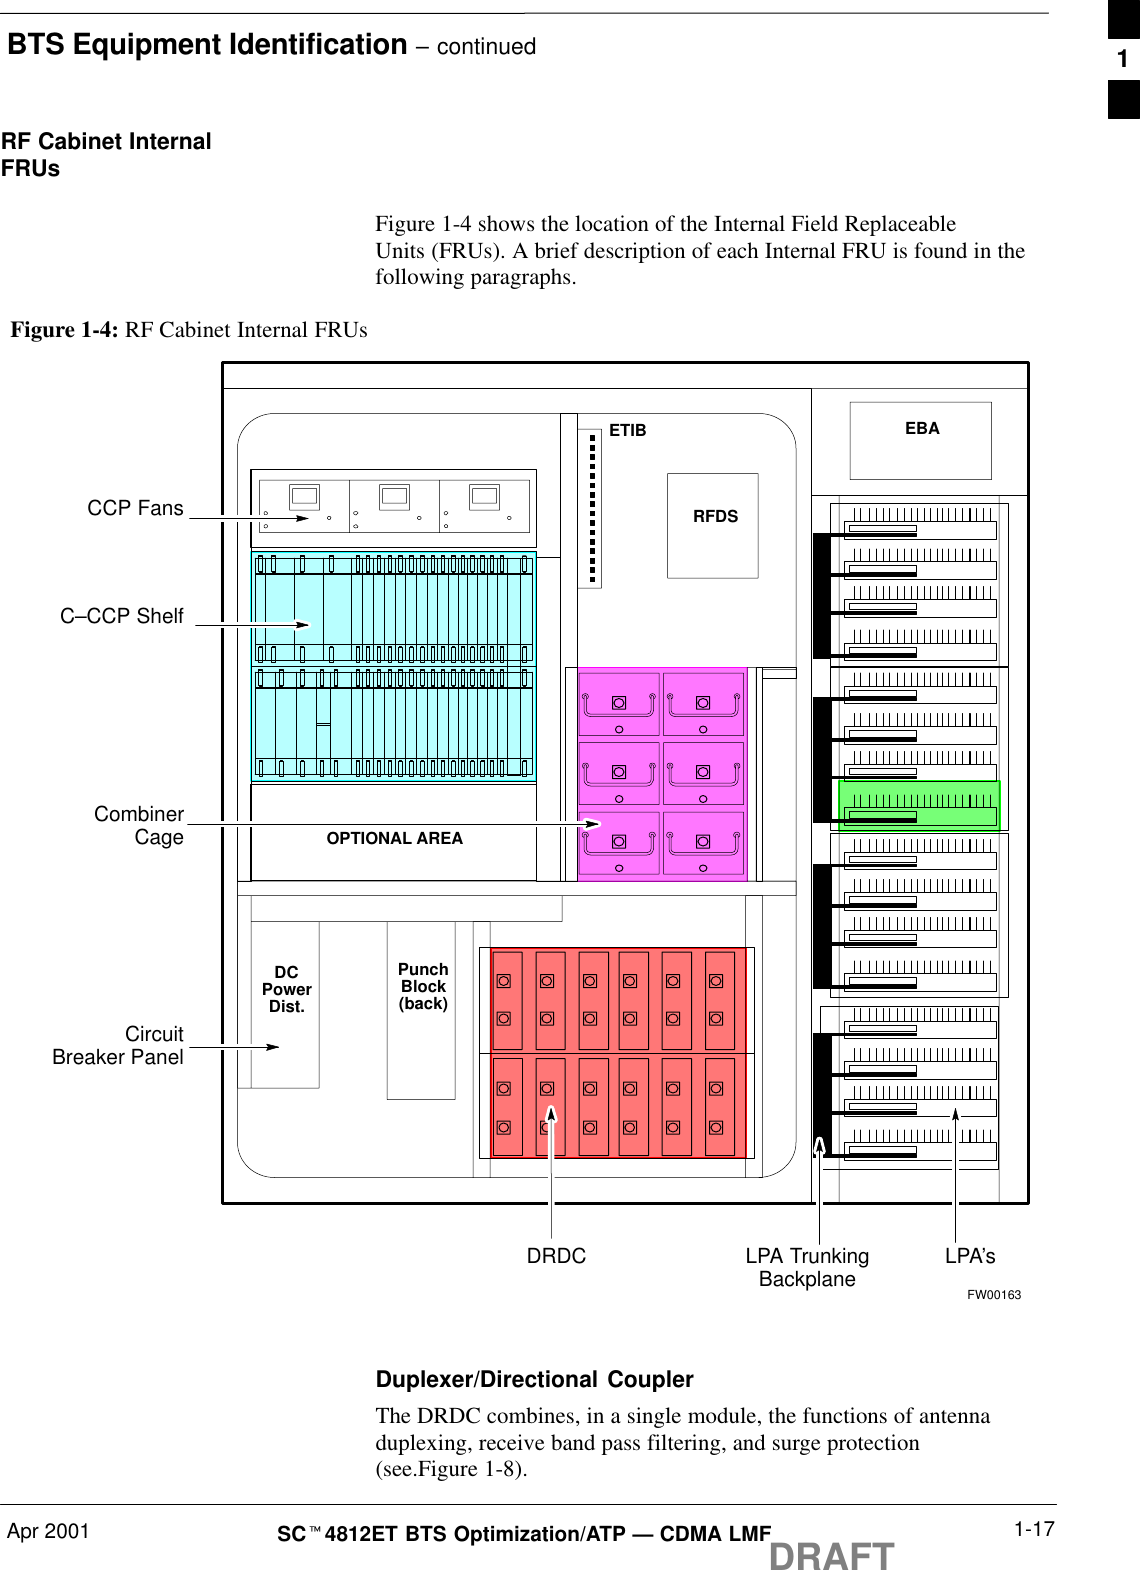 BTS Equipment Identification – continuedApr 2001 1-17SCt4812ET BTS Optimization/ATP — CDMA LMFDRAFTRF Cabinet InternalFRUsFigure 1-4 shows the location of the Internal Field ReplaceableUnits (FRUs). A brief description of each Internal FRU is found in thefollowing paragraphs.Figure 1-4: RF Cabinet Internal FRUsDRDC LPA’sCCP FansLPA TrunkingBackplane5 RU Rack SpaceRFDSDCPowerDist.PunchBlock(back)EBAC–CCP ShelfCombinerCageCircuitBreaker PanelETIBFW00163OPTIONAL AREADuplexer/Directional CouplerThe DRDC combines, in a single module, the functions of antennaduplexing, receive band pass filtering, and surge protection(see.Figure 1-8).1